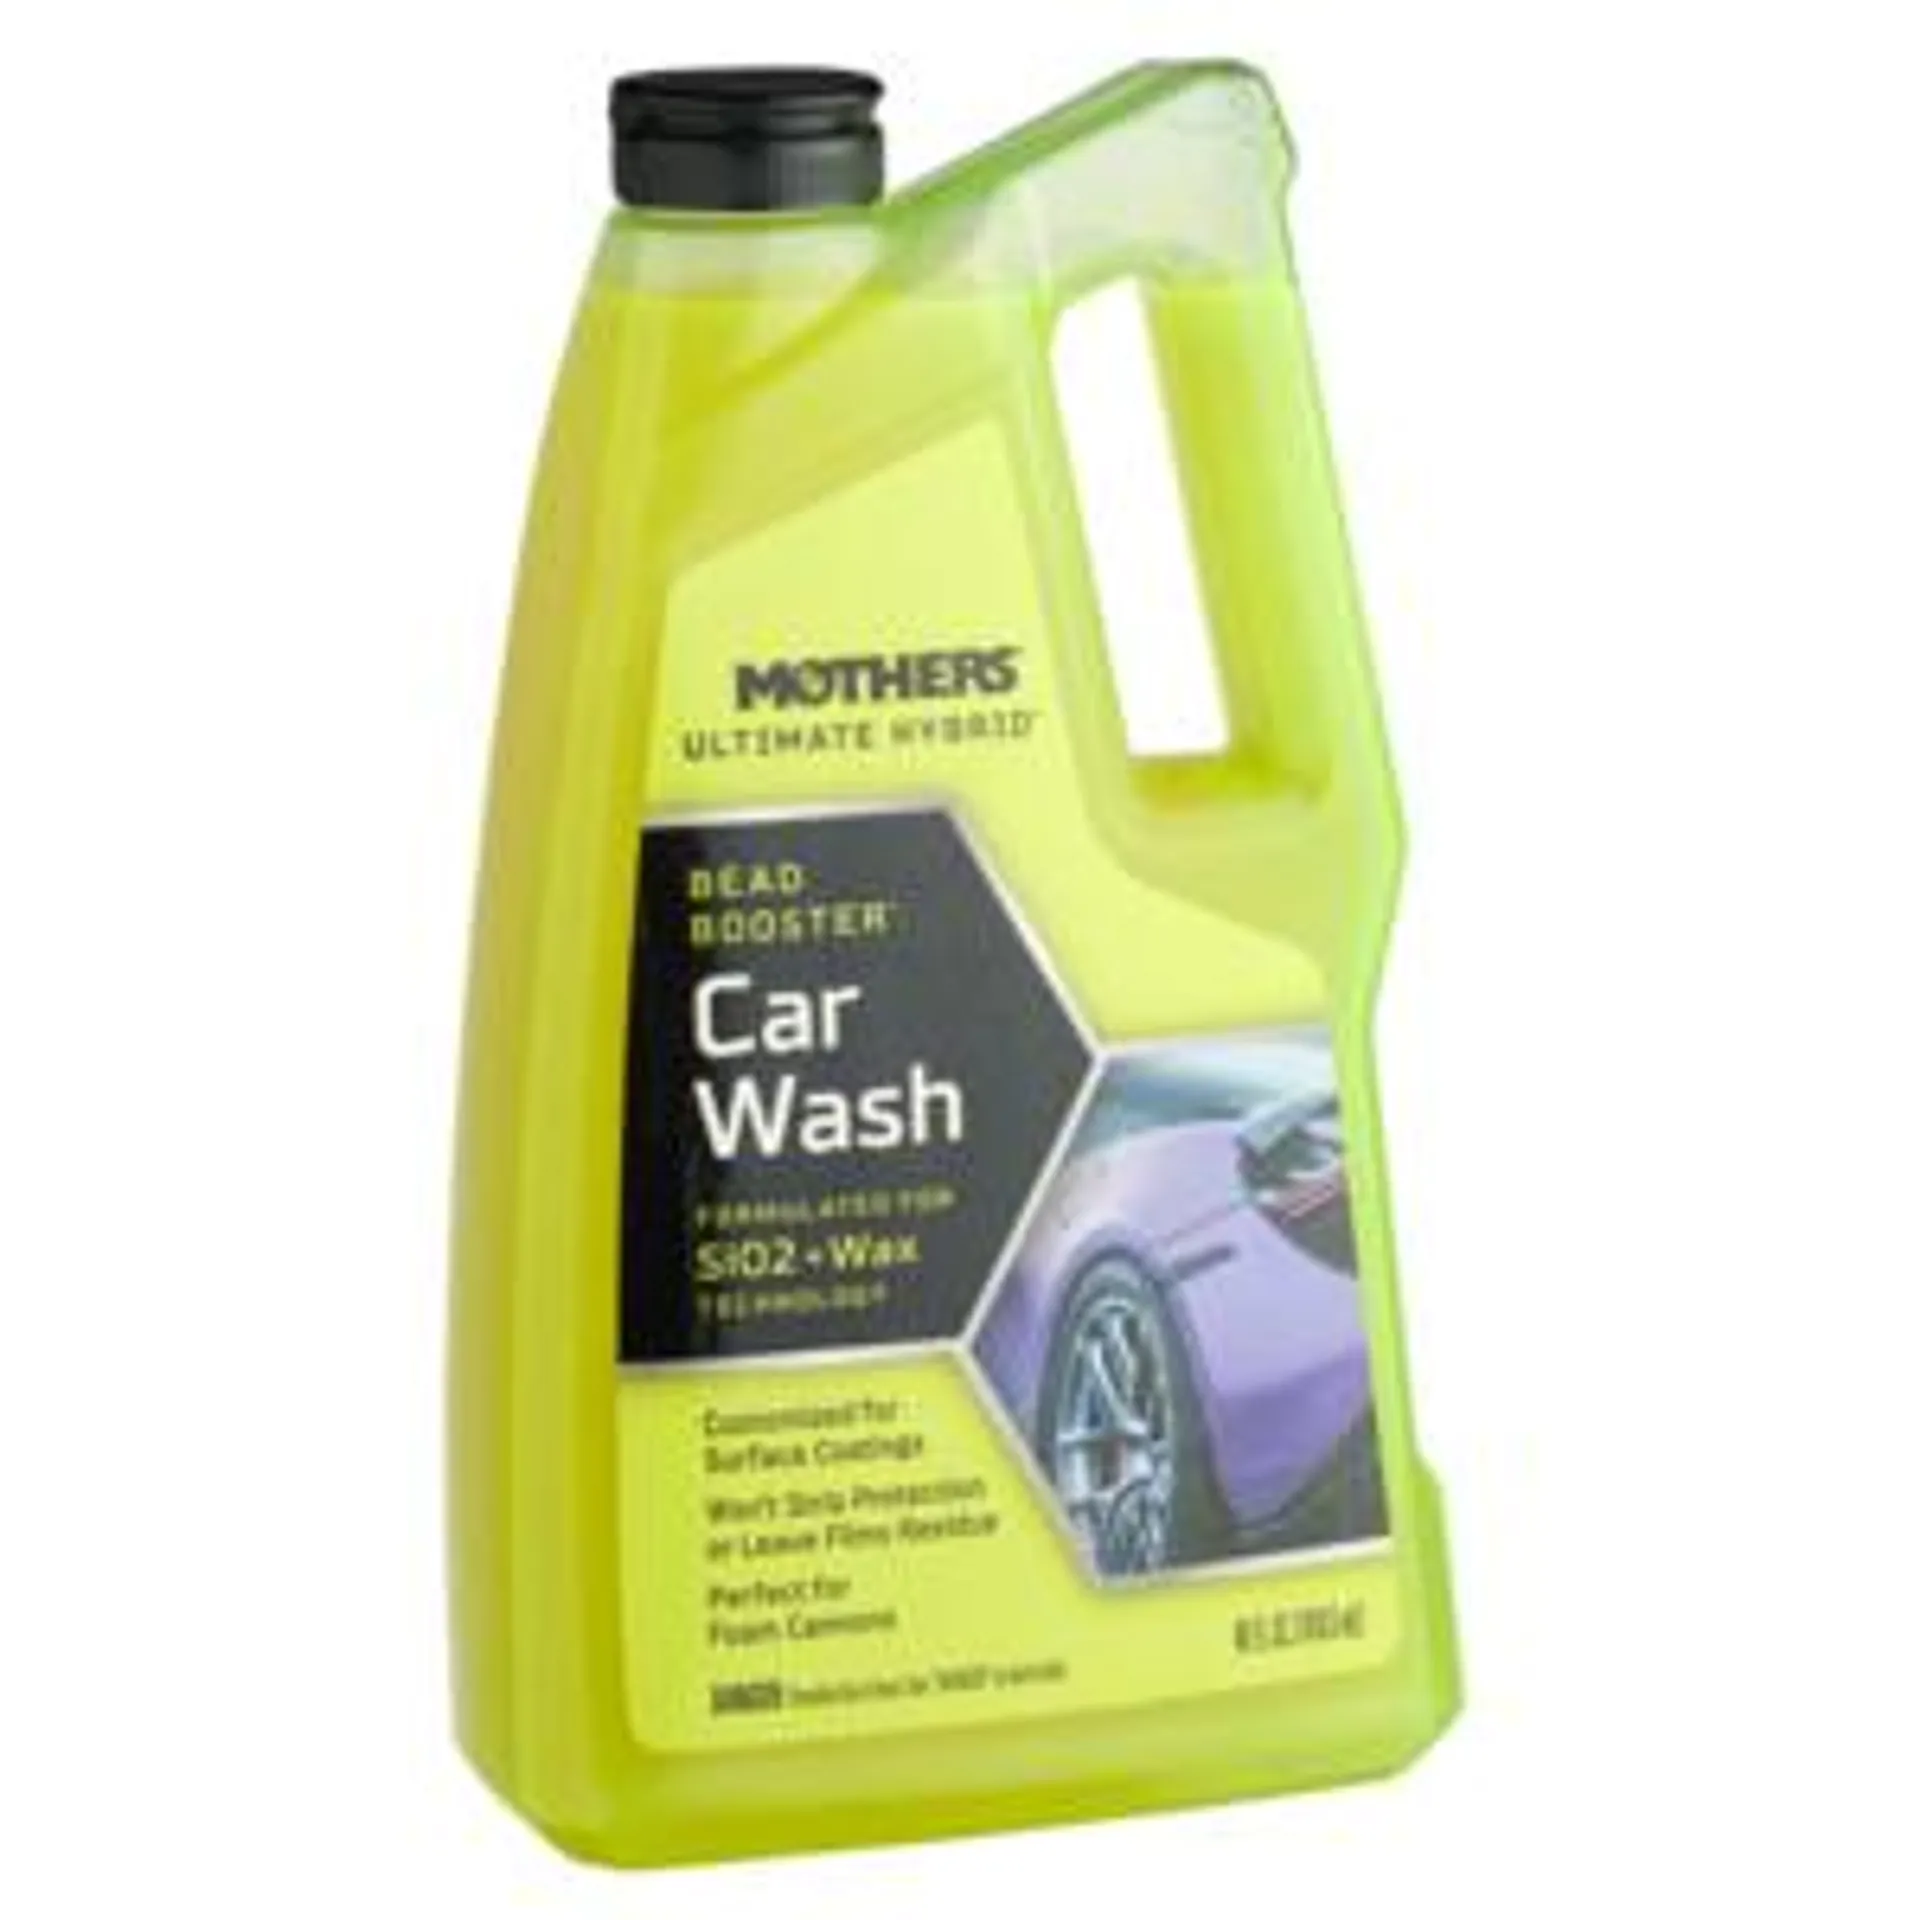 Mothers Ultimate Hybrid Car Wash Bead Booster Car Wash 1419mL - 655668